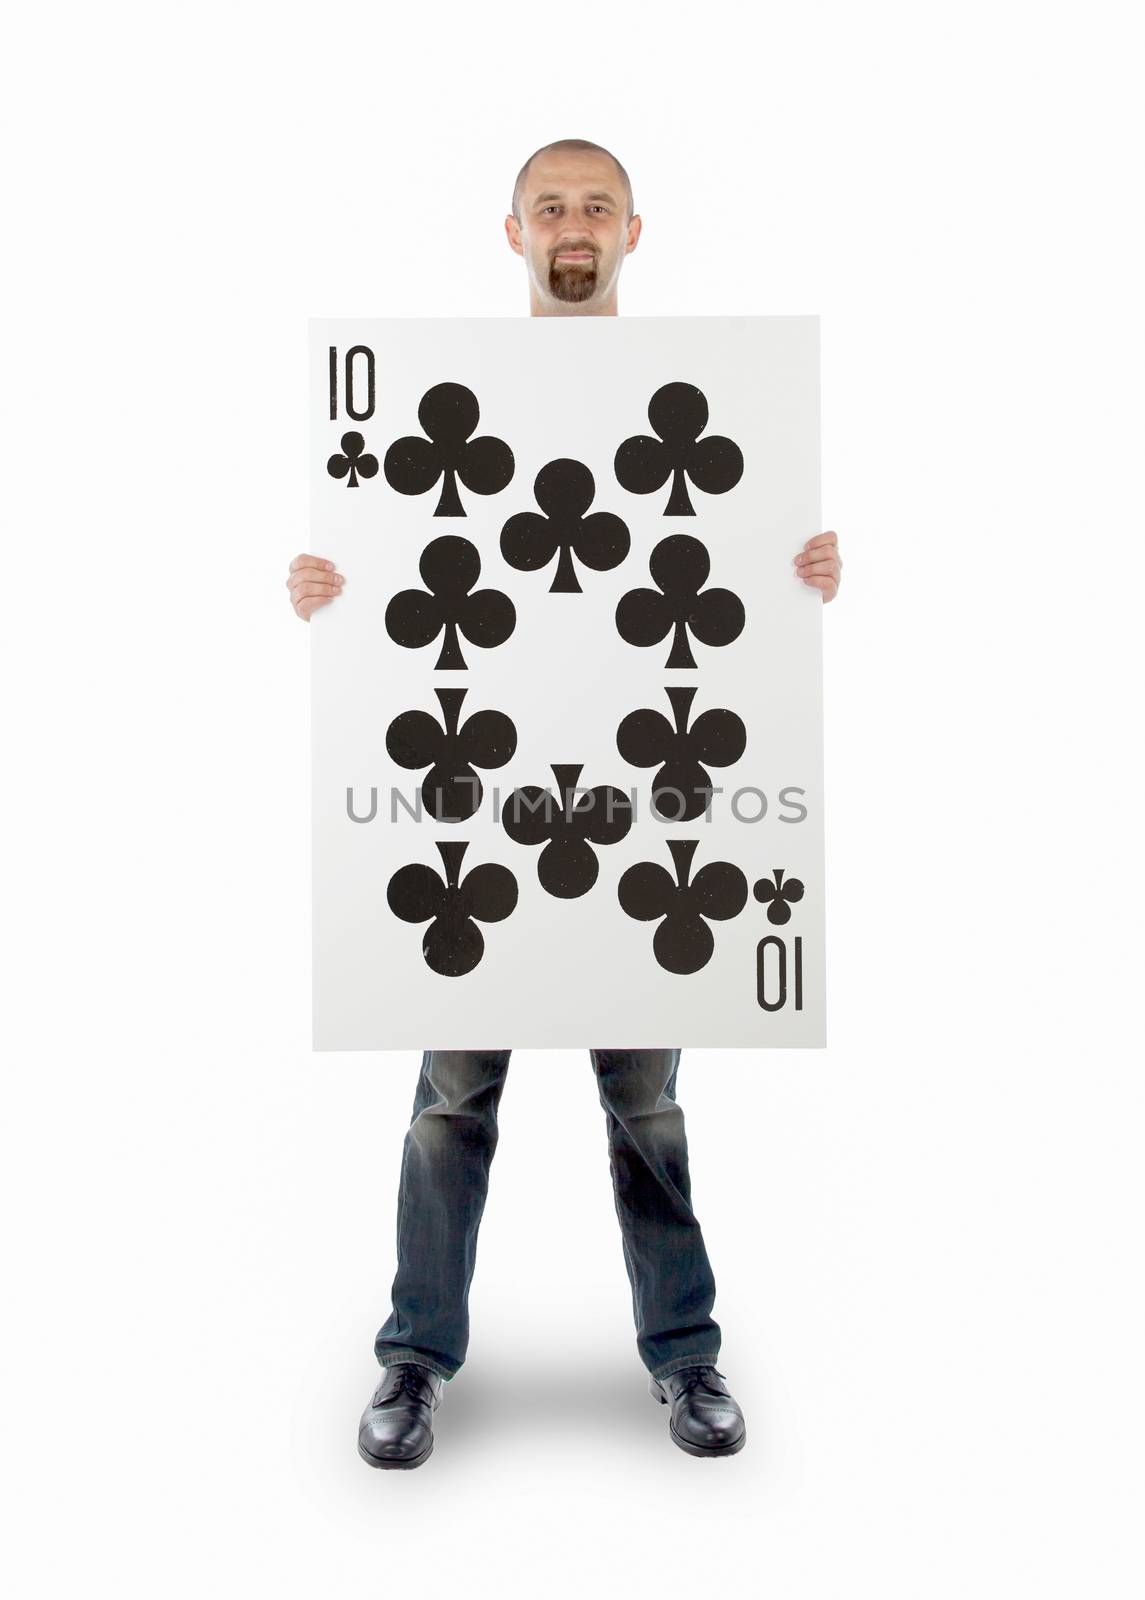 Businessman with large playing card - Ten of clubs